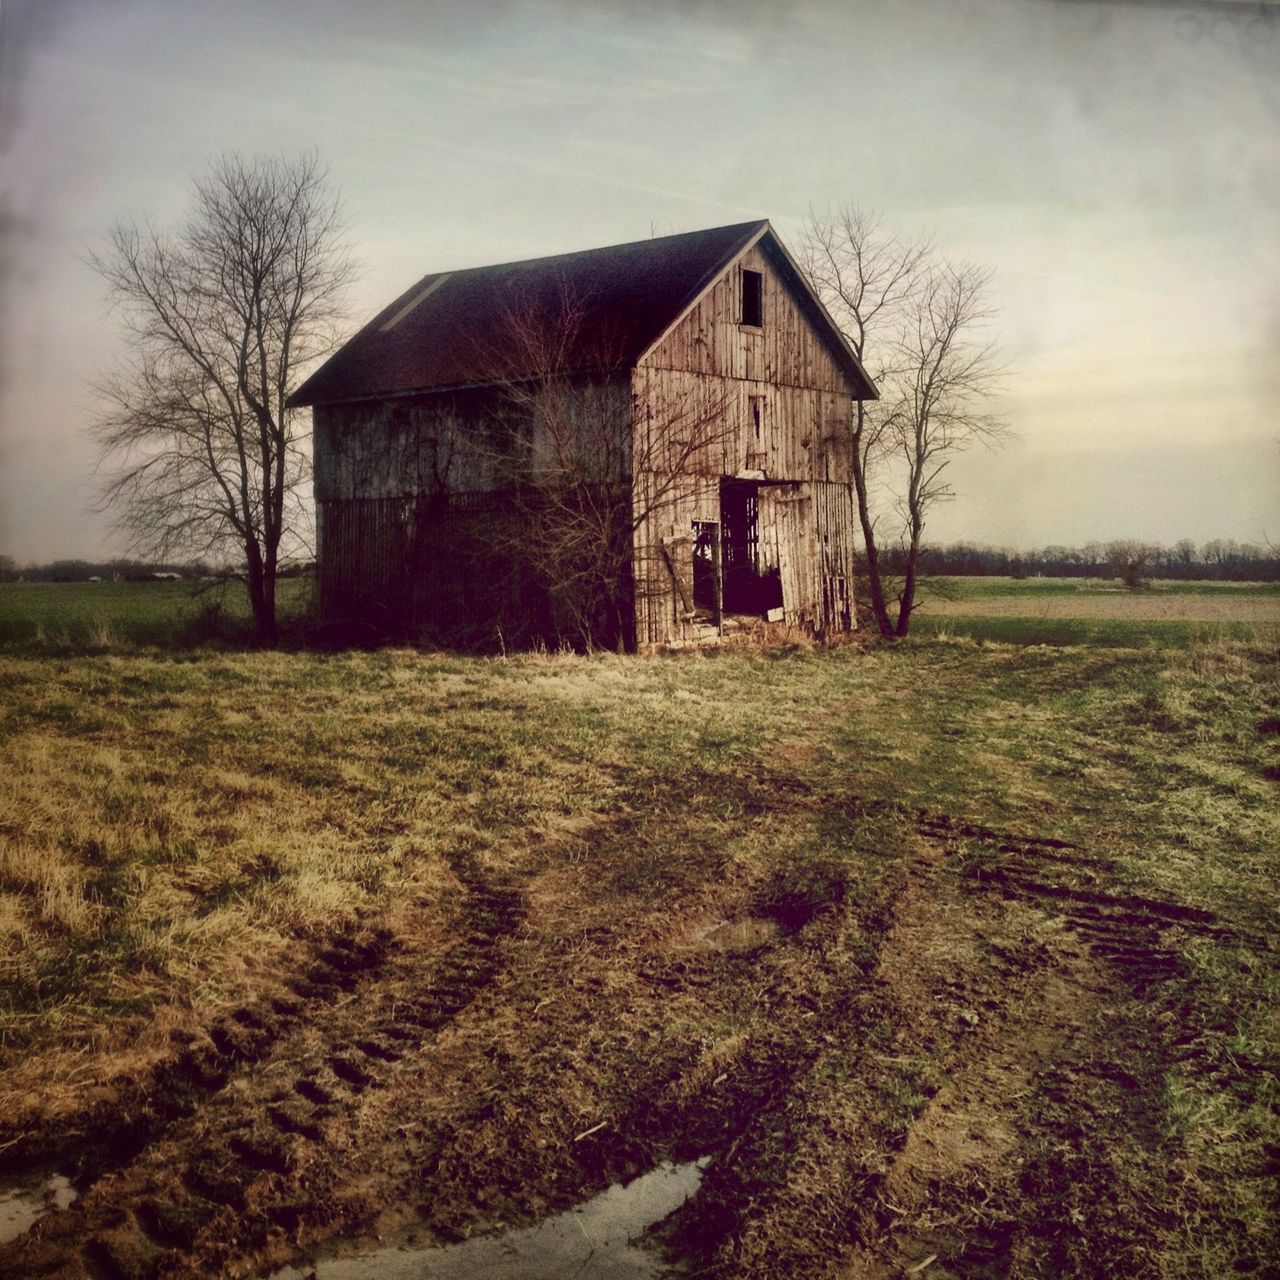 architecture, building exterior, built structure, field, grass, sky, bare tree, house, tree, landscape, abandoned, rural scene, old, grassy, tranquility, nature, tranquil scene, day, no people, outdoors